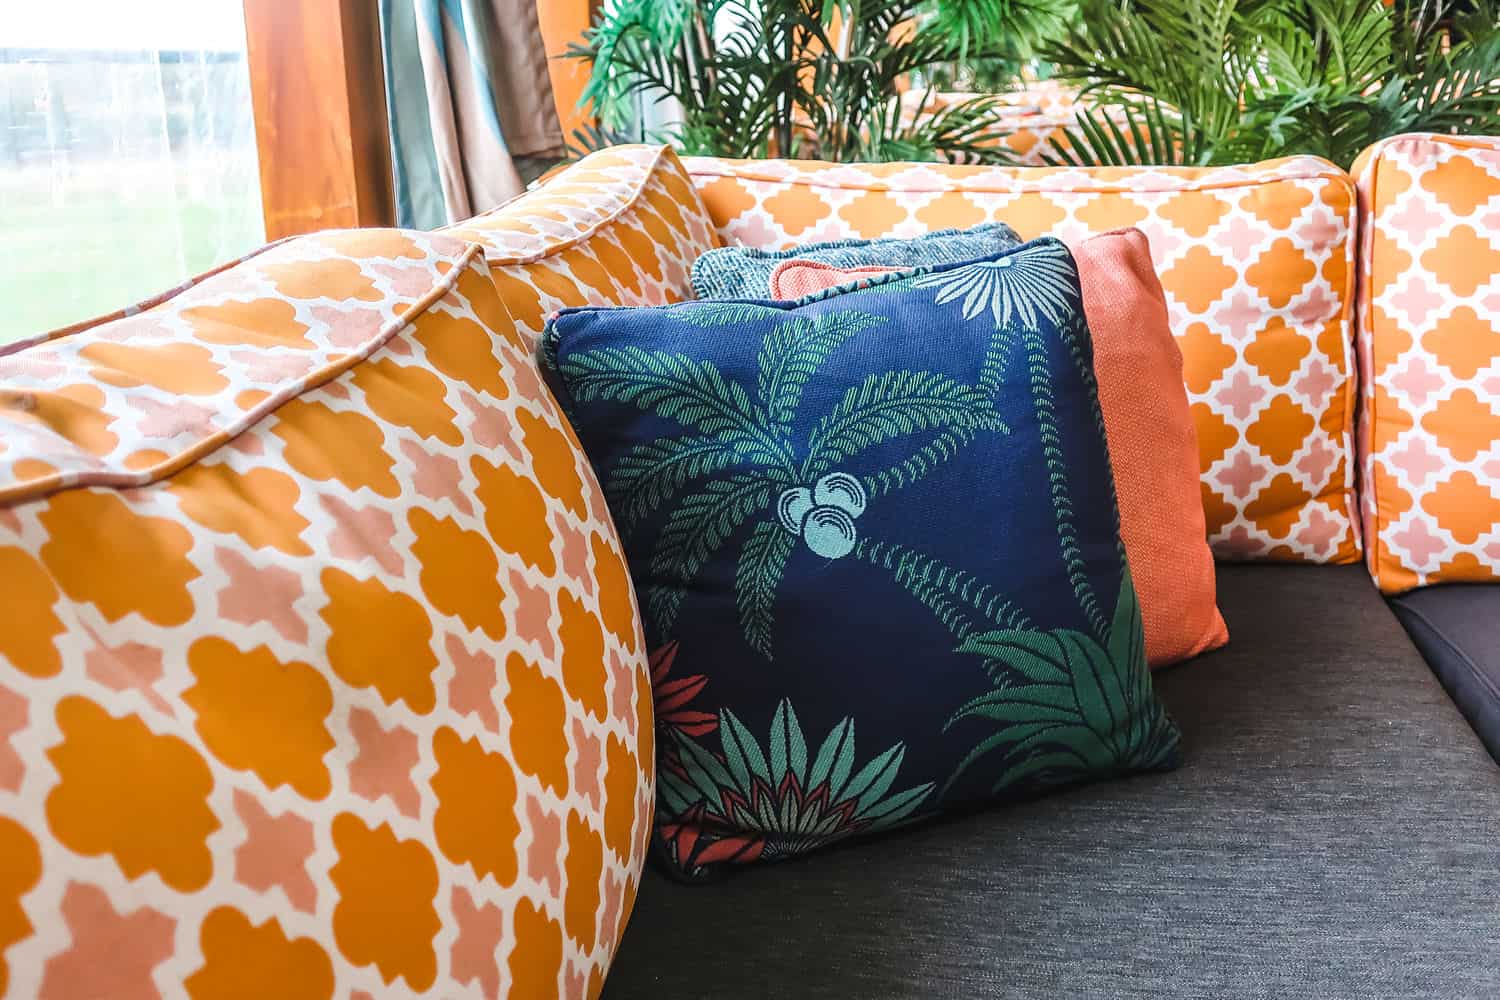 Orange and Blue Cushions on Couch